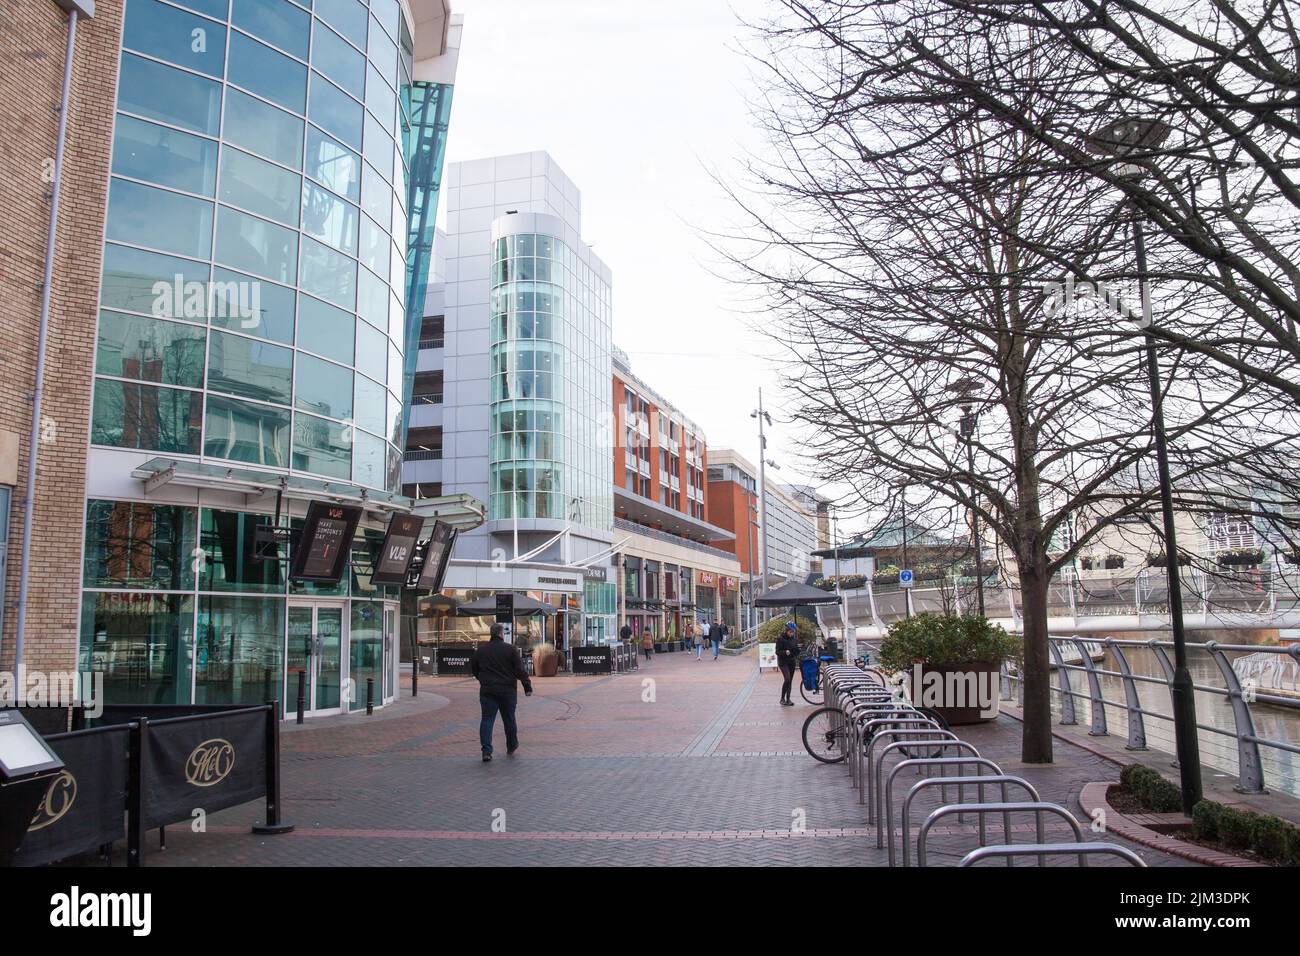 Views of Reading, Berkshire in the UK Stock Photo